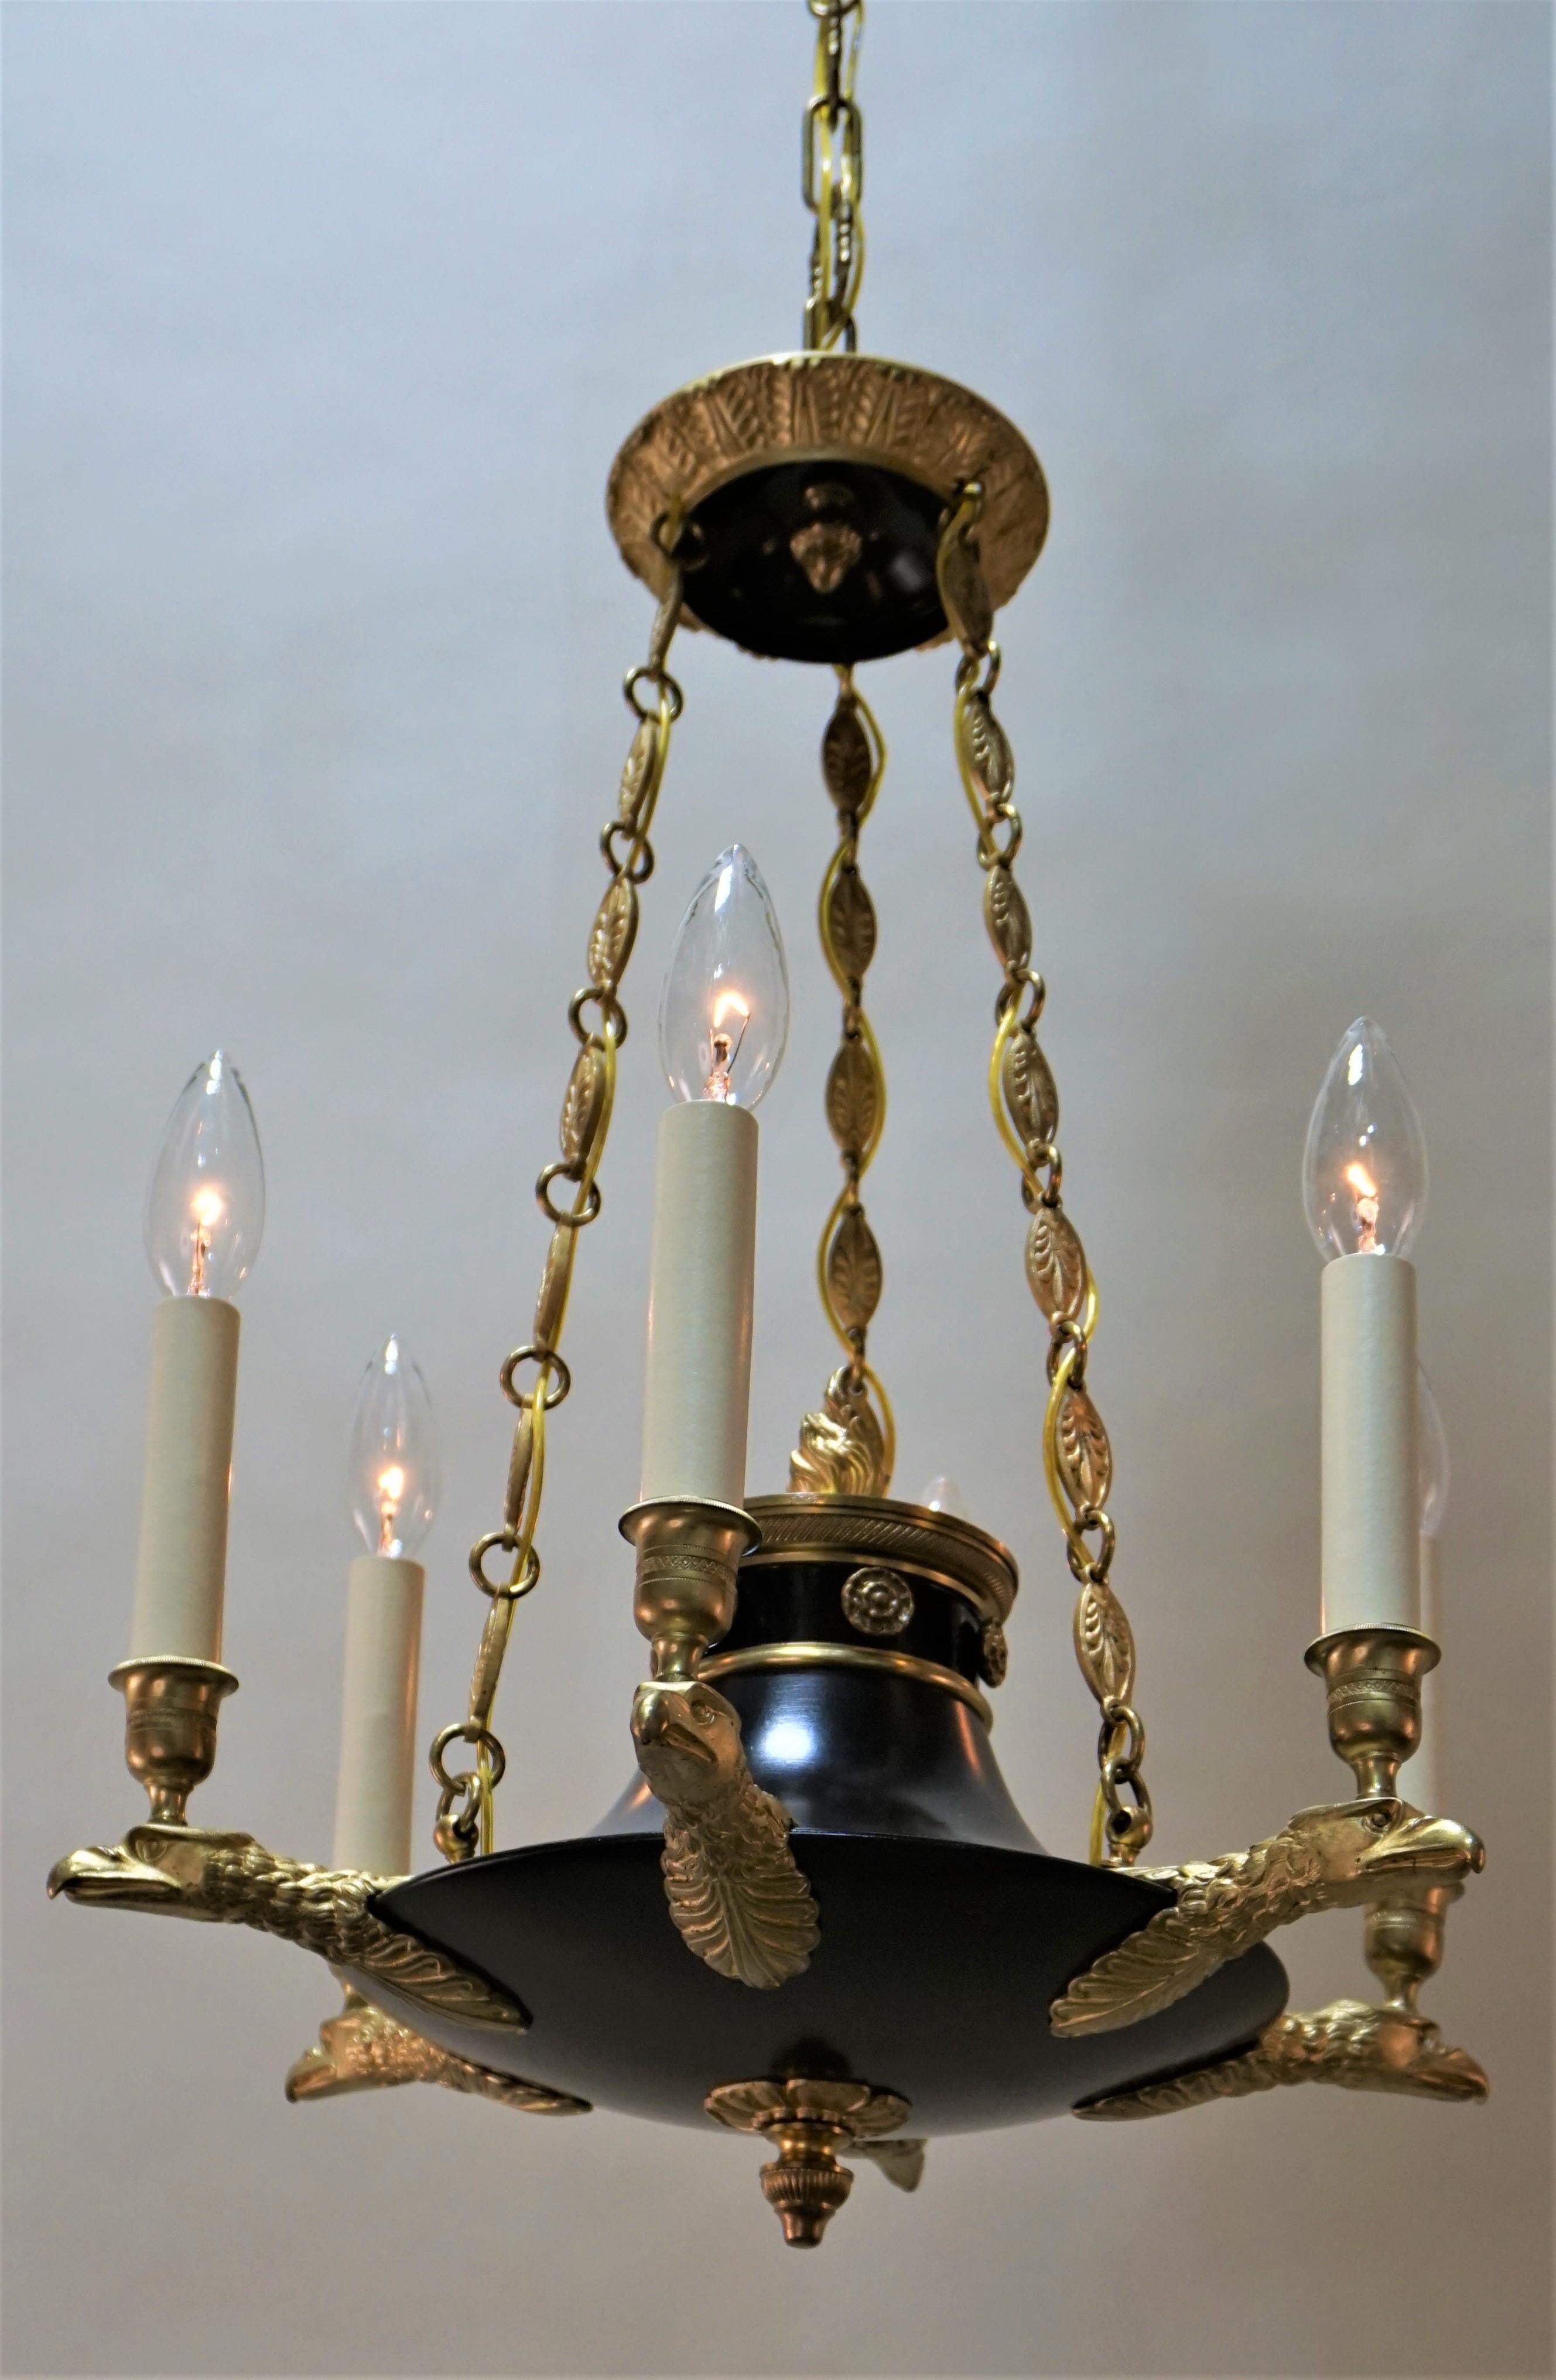 French six-light Empire style eagle head arms bronze chandelier.
Total height is 37